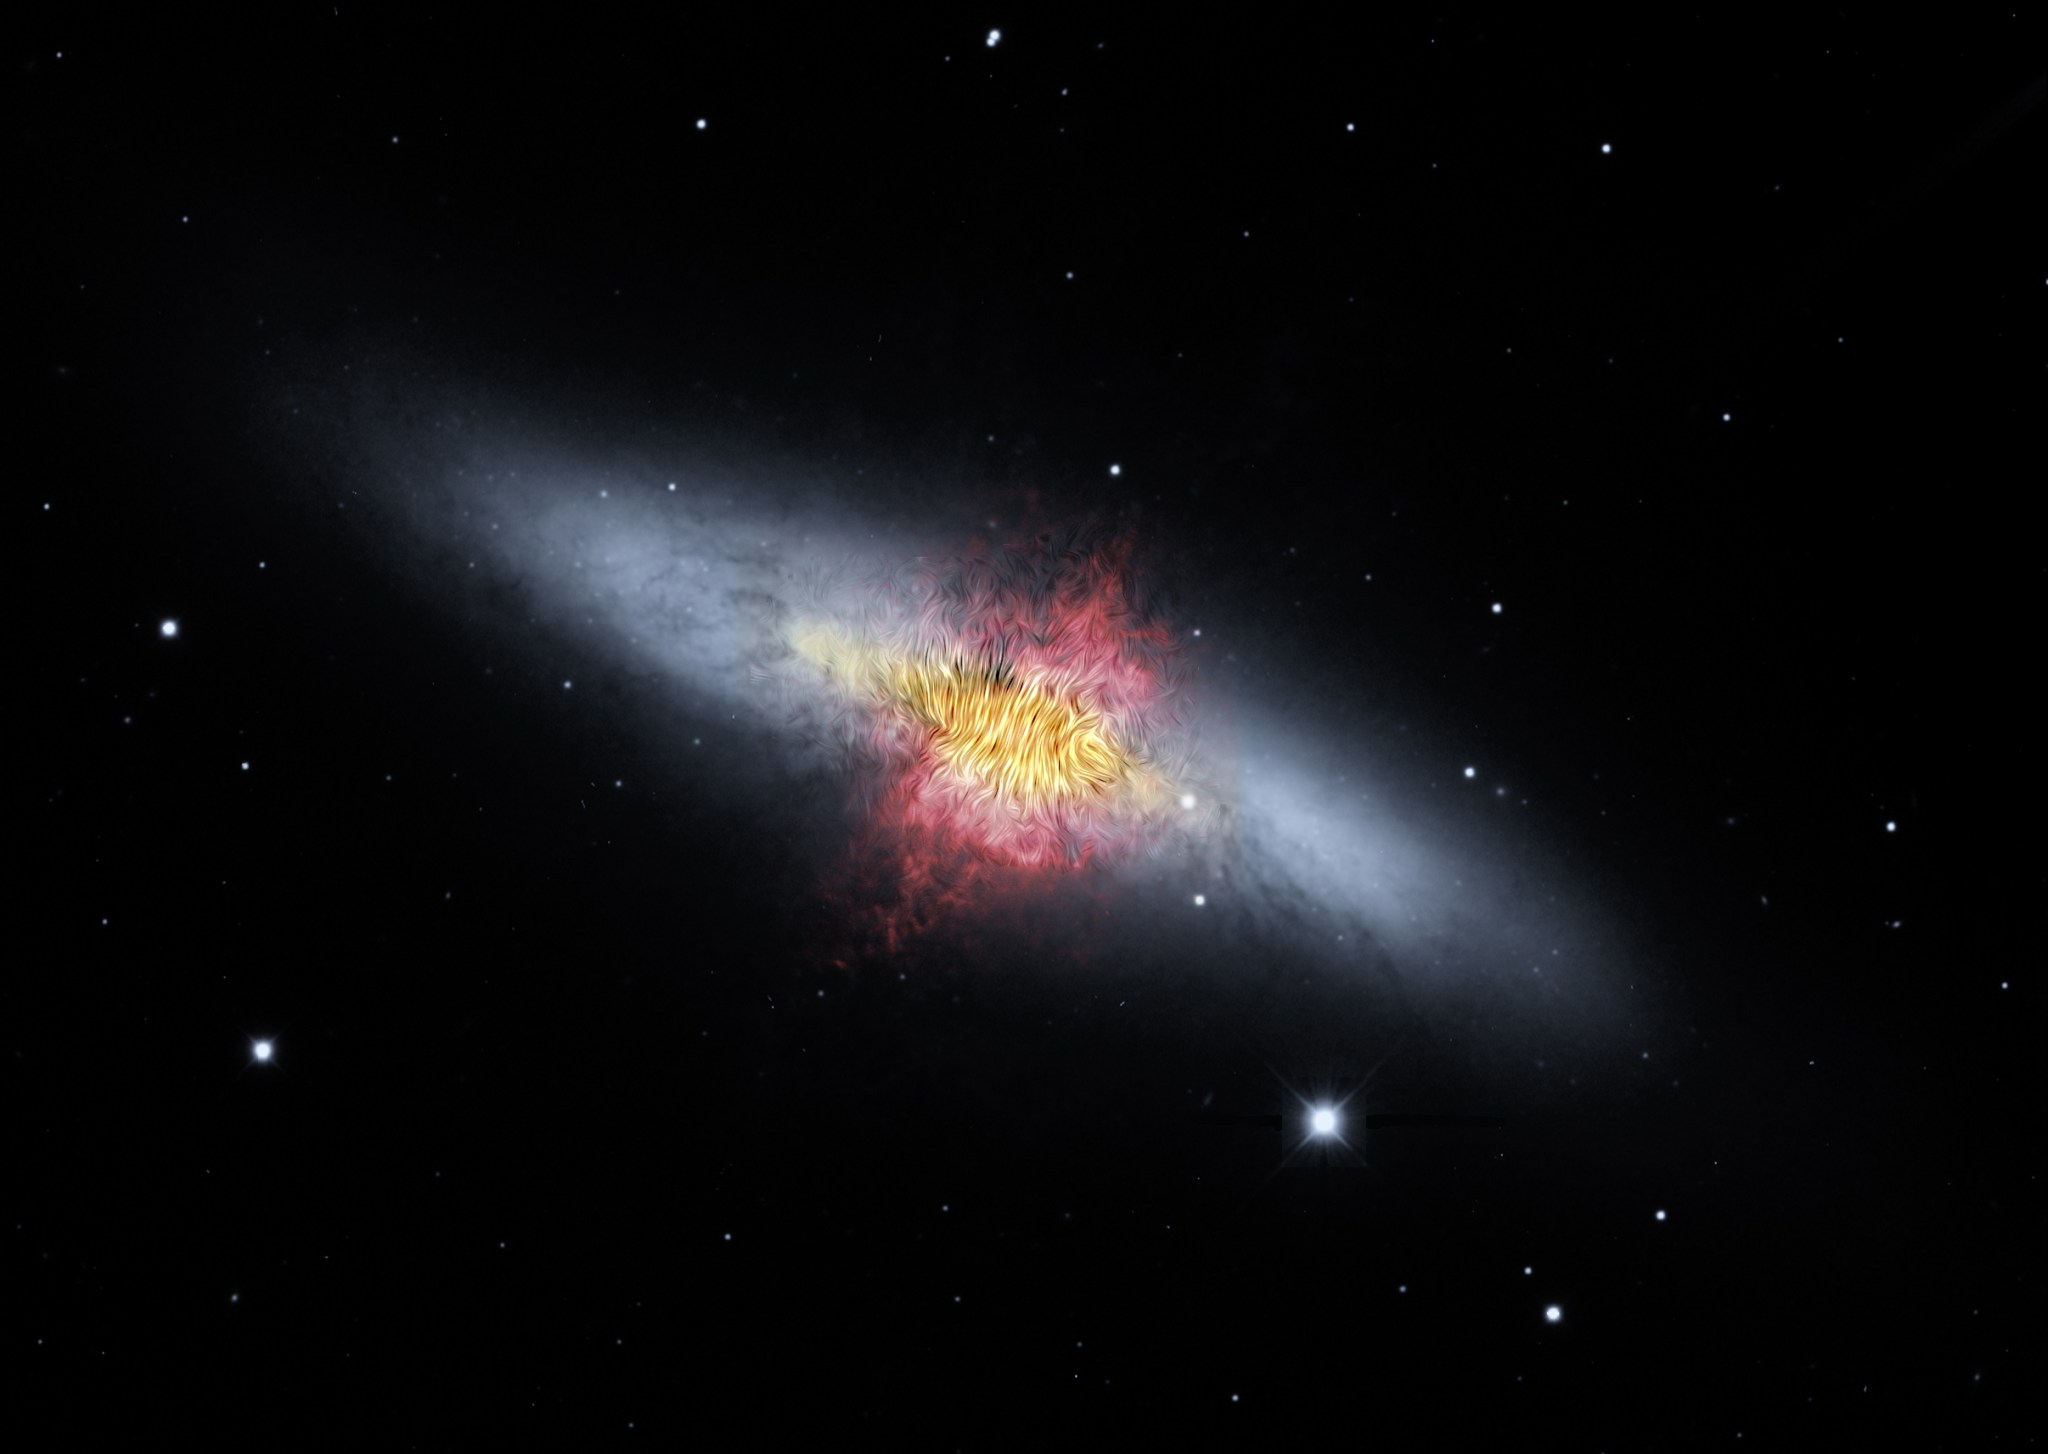 Image of Cigar Galaxy with its magnetic field shown as streamlines over red outflow, yellow dust, and black and white stars